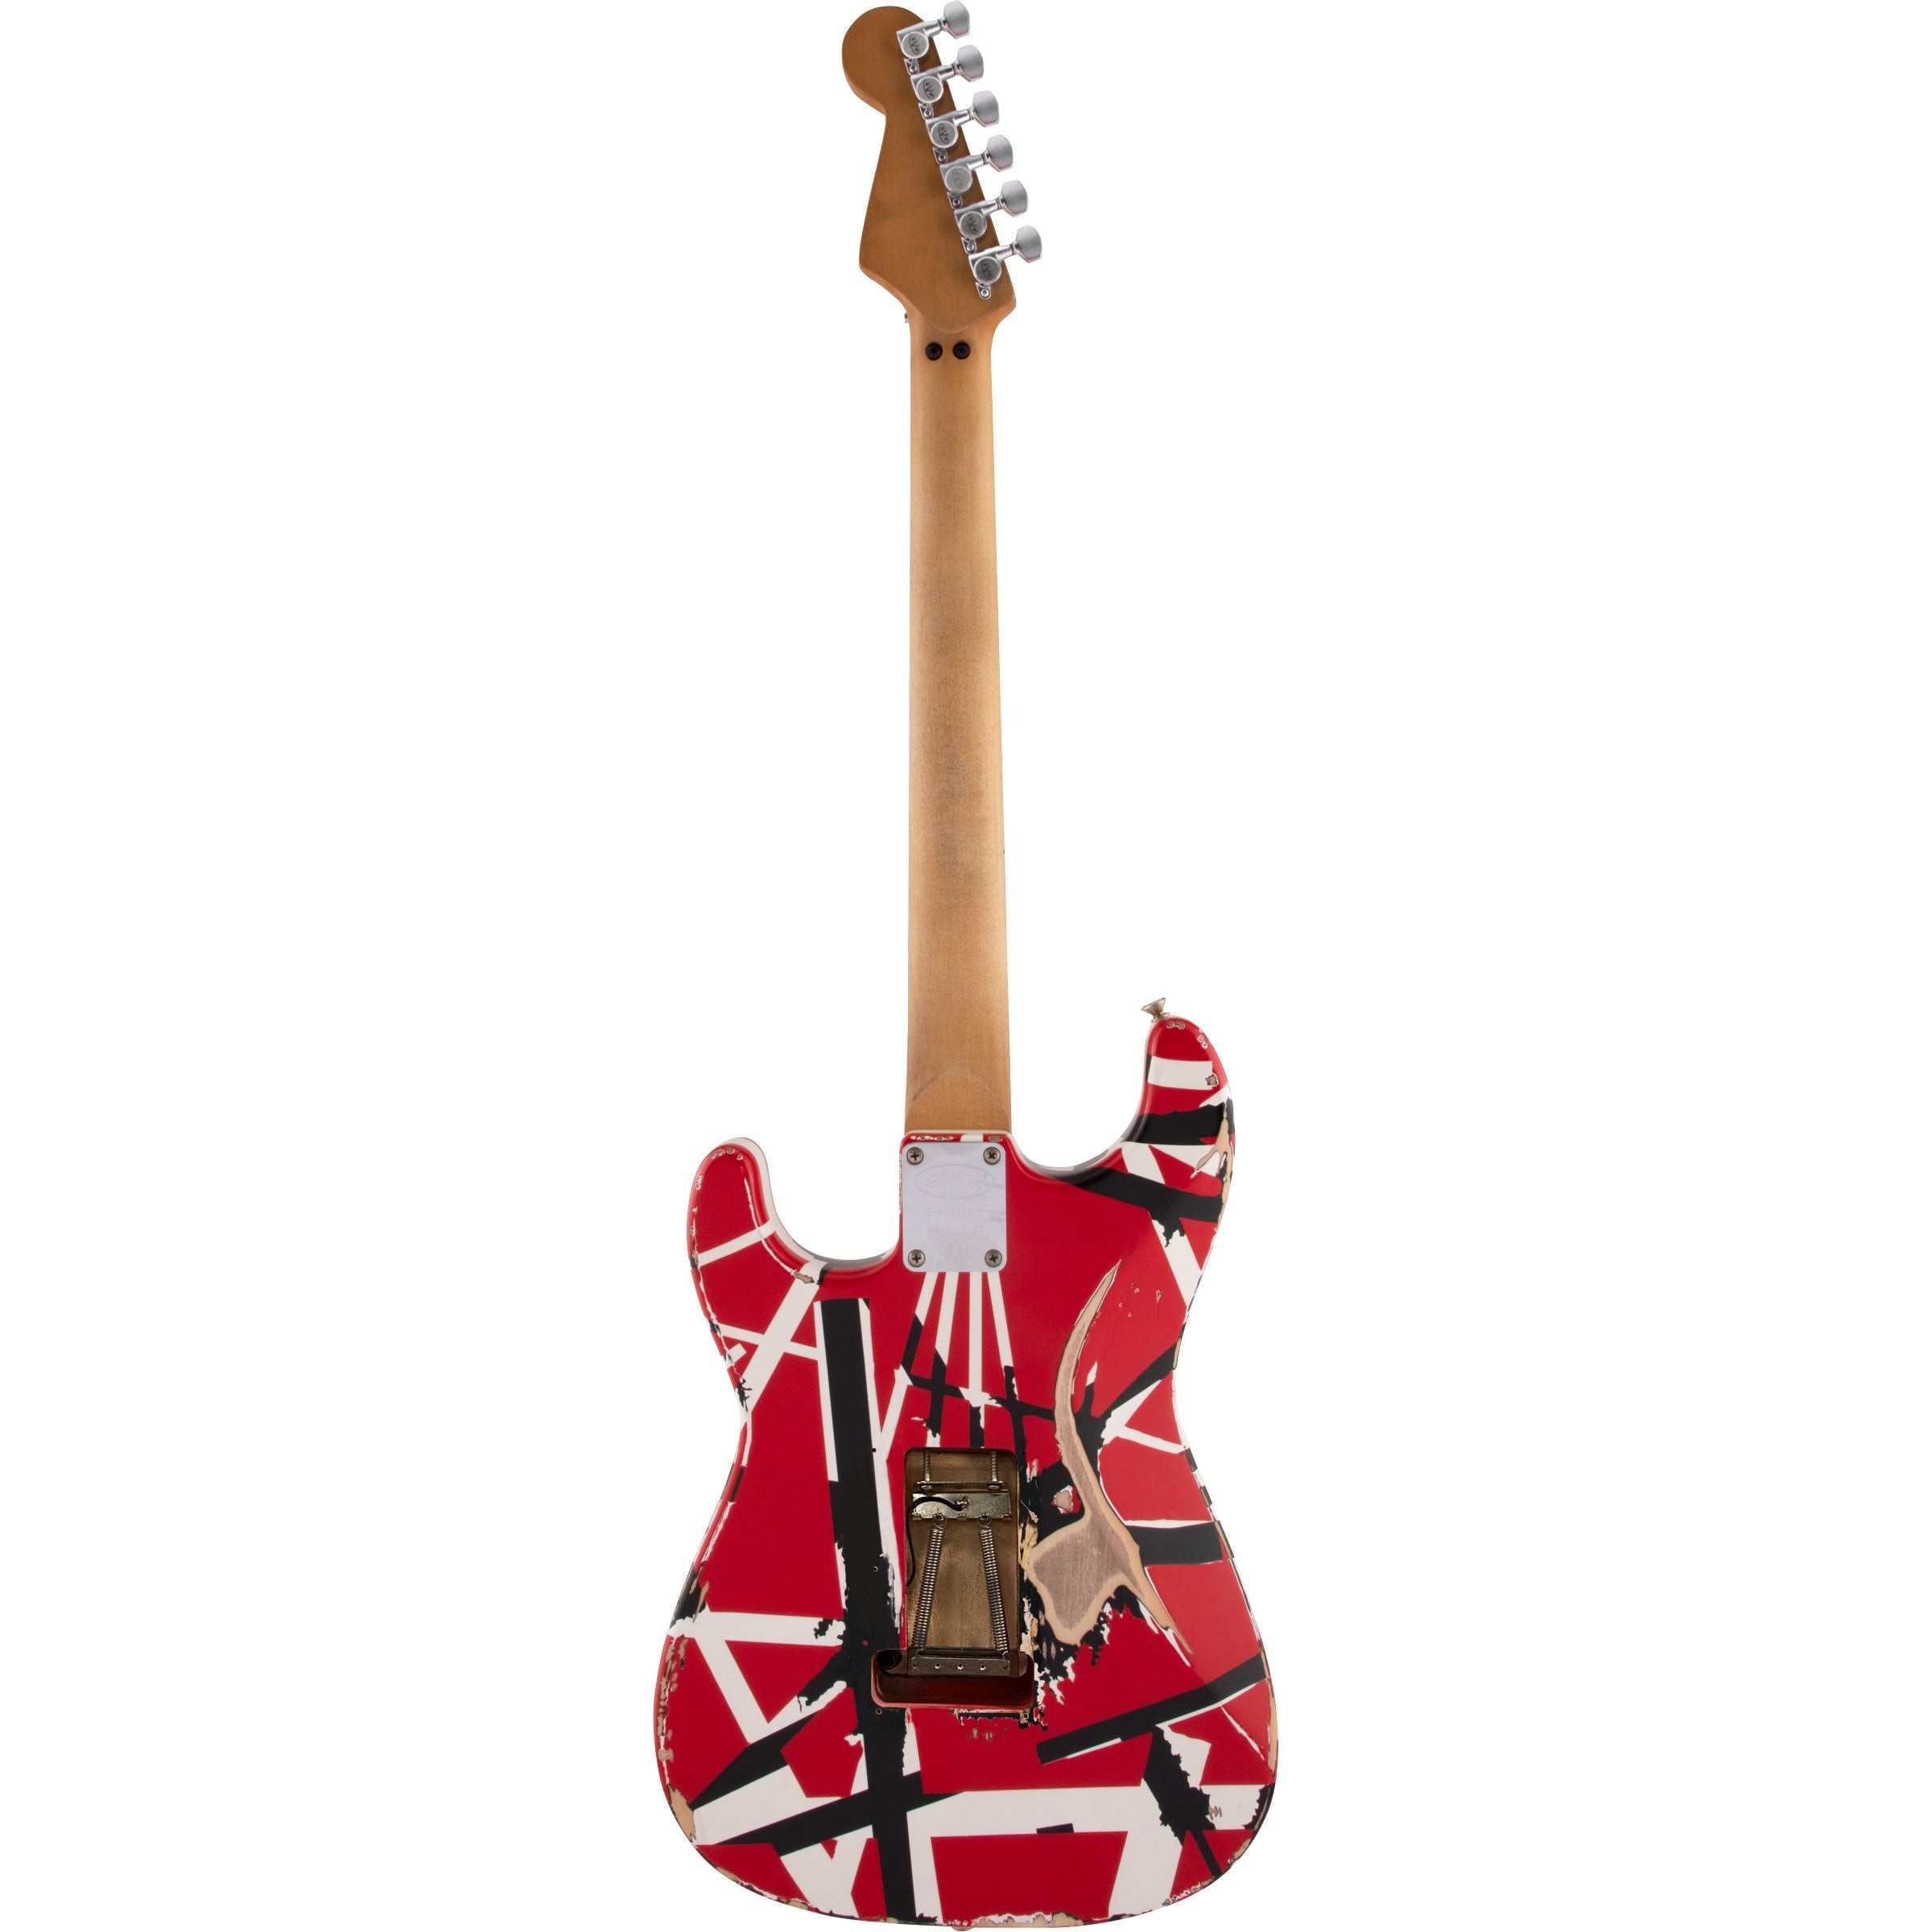 EVH Striped Series Frankie Guitar, Red with Black Stripes Relic